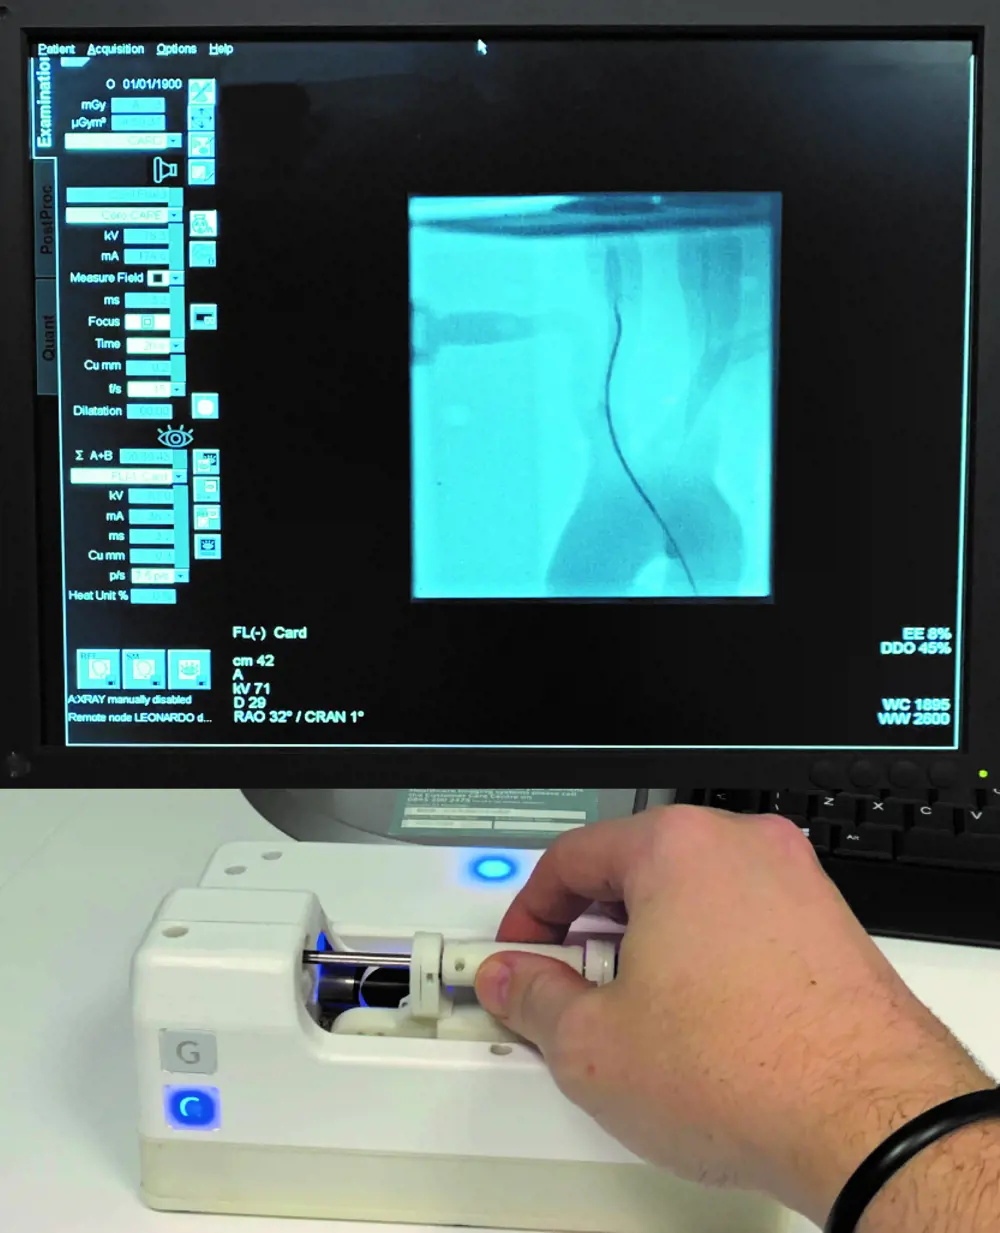 The hand of a medical professional using the control robot in front of a screen with a live generated image of the corresponding treatment room robot's wires inside the patient.